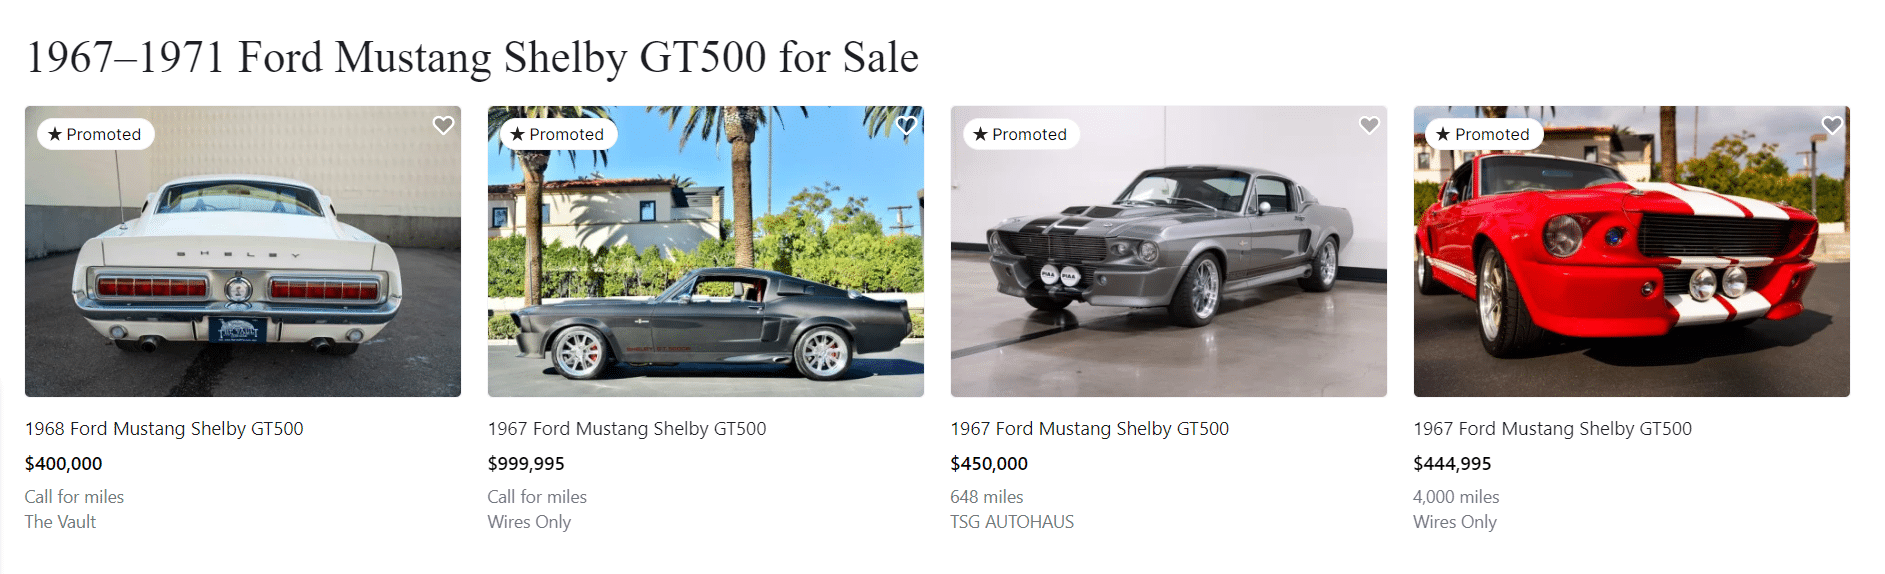 WHAT IS THE AVERAGE PRICE FOR A SHELBY GT500?